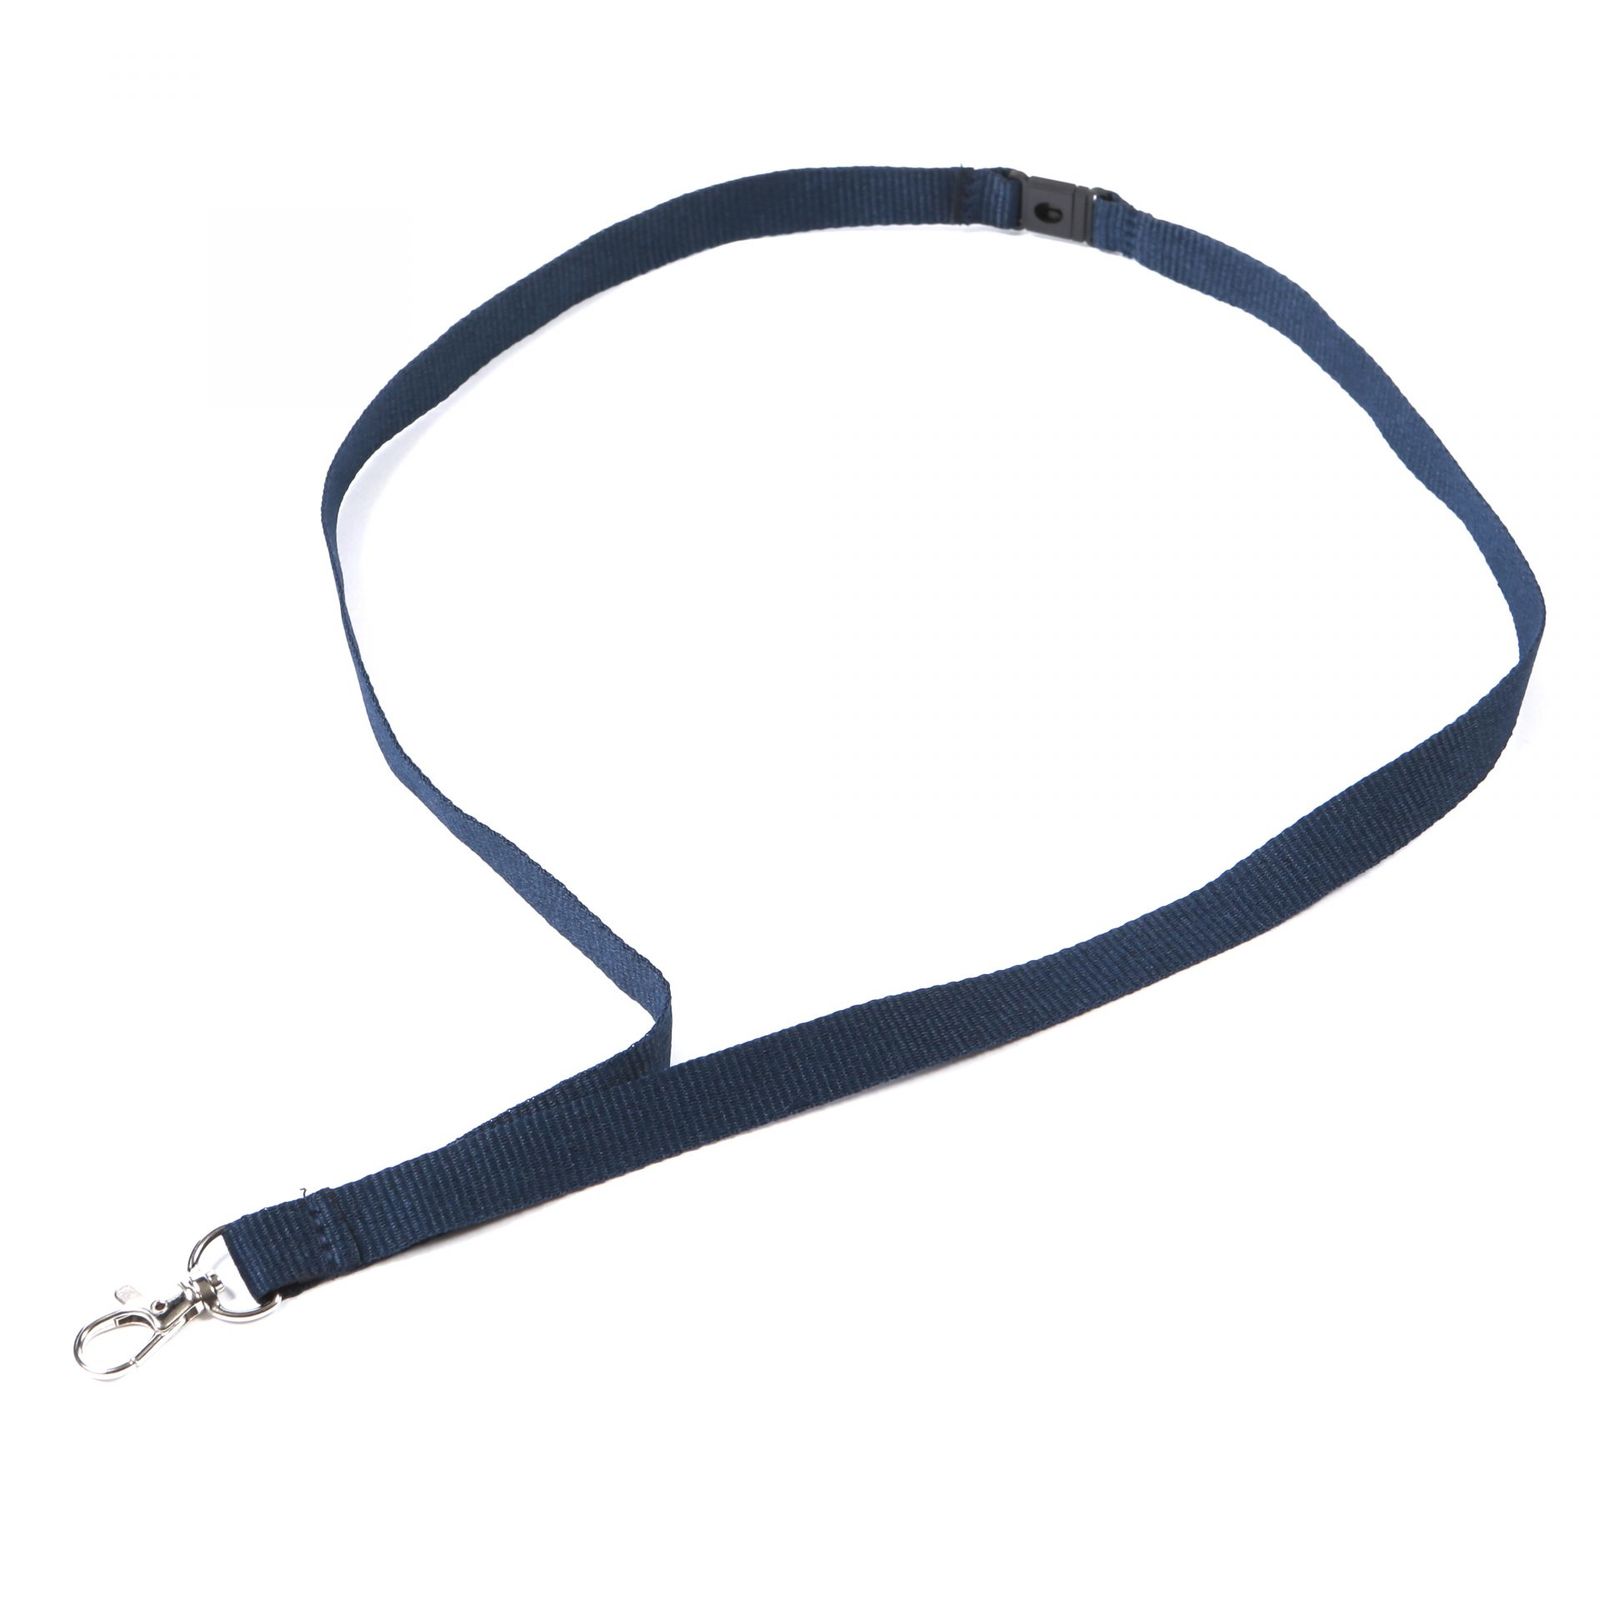 Buy Mixed Colours Plain Lanyards on Lanyards Direct Today!